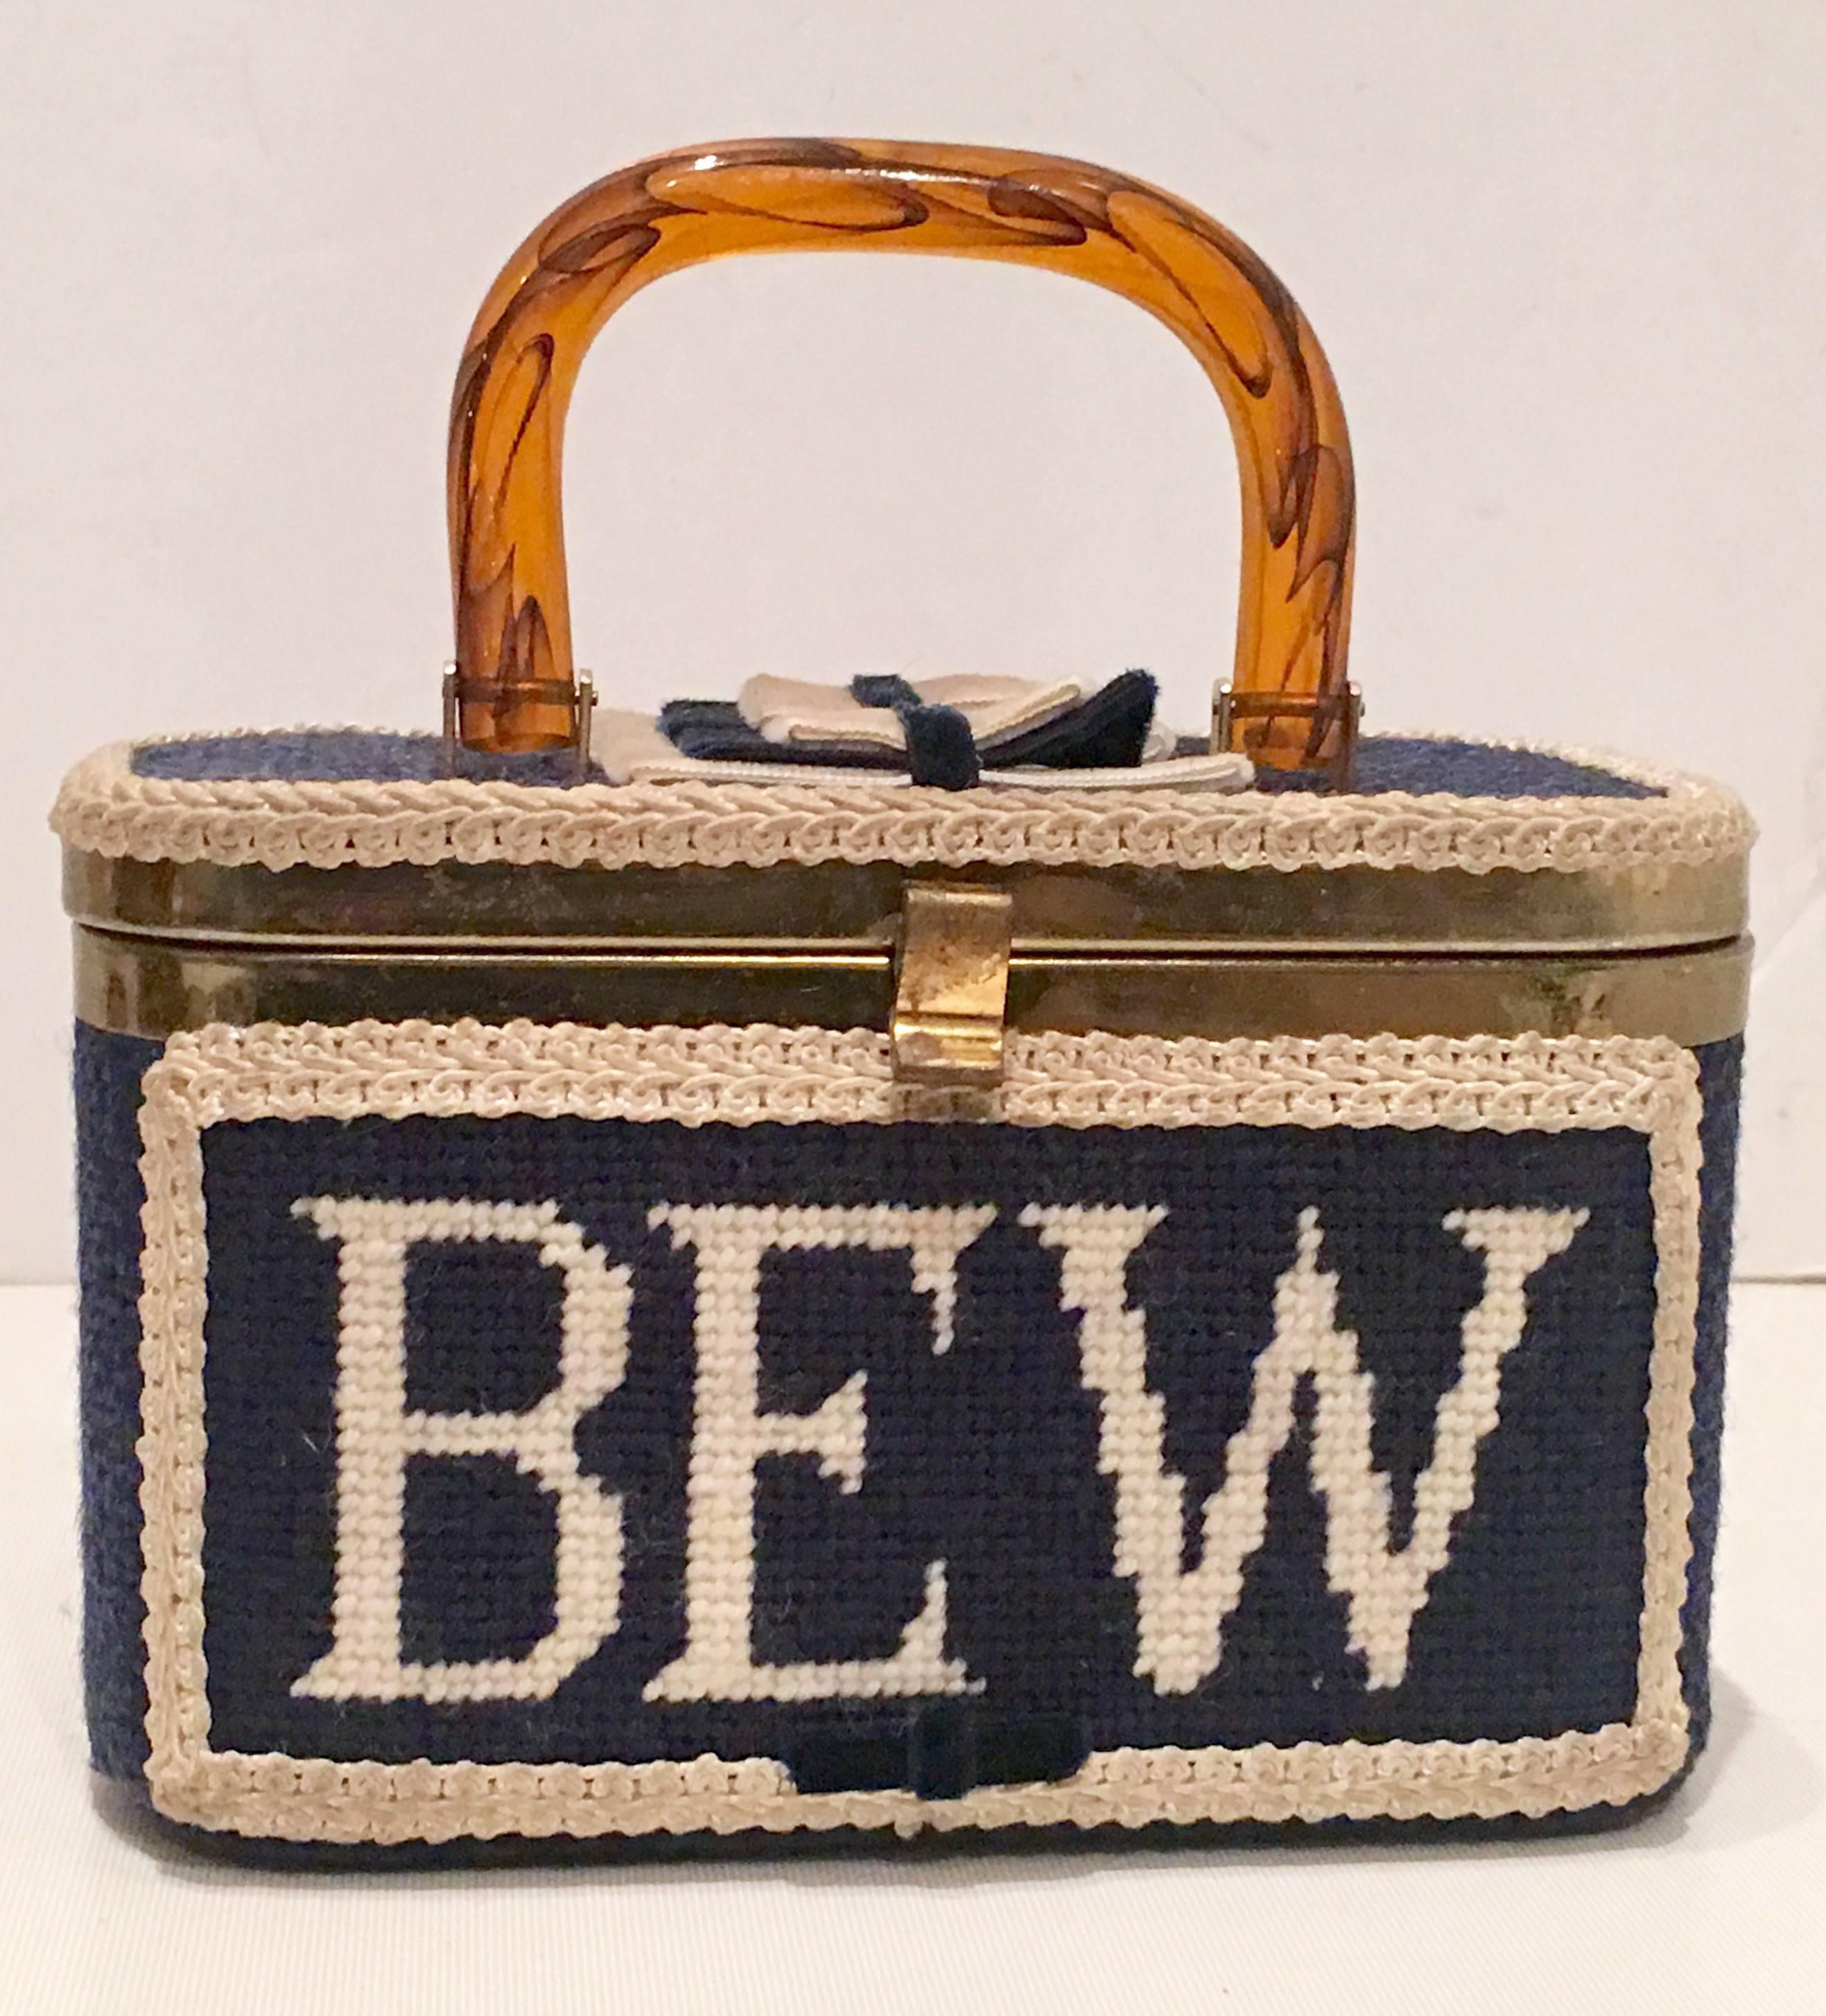 1050'S Collectible & Adorable JR Florida Box Style Navy Blue & White, Crewel Monogrammed Box Style Hand Bag with Tortoise colored Lucite Carrying Handle. The Exterior is finished with crochet trim and velvet bows. The Needlepoint Monogram reads